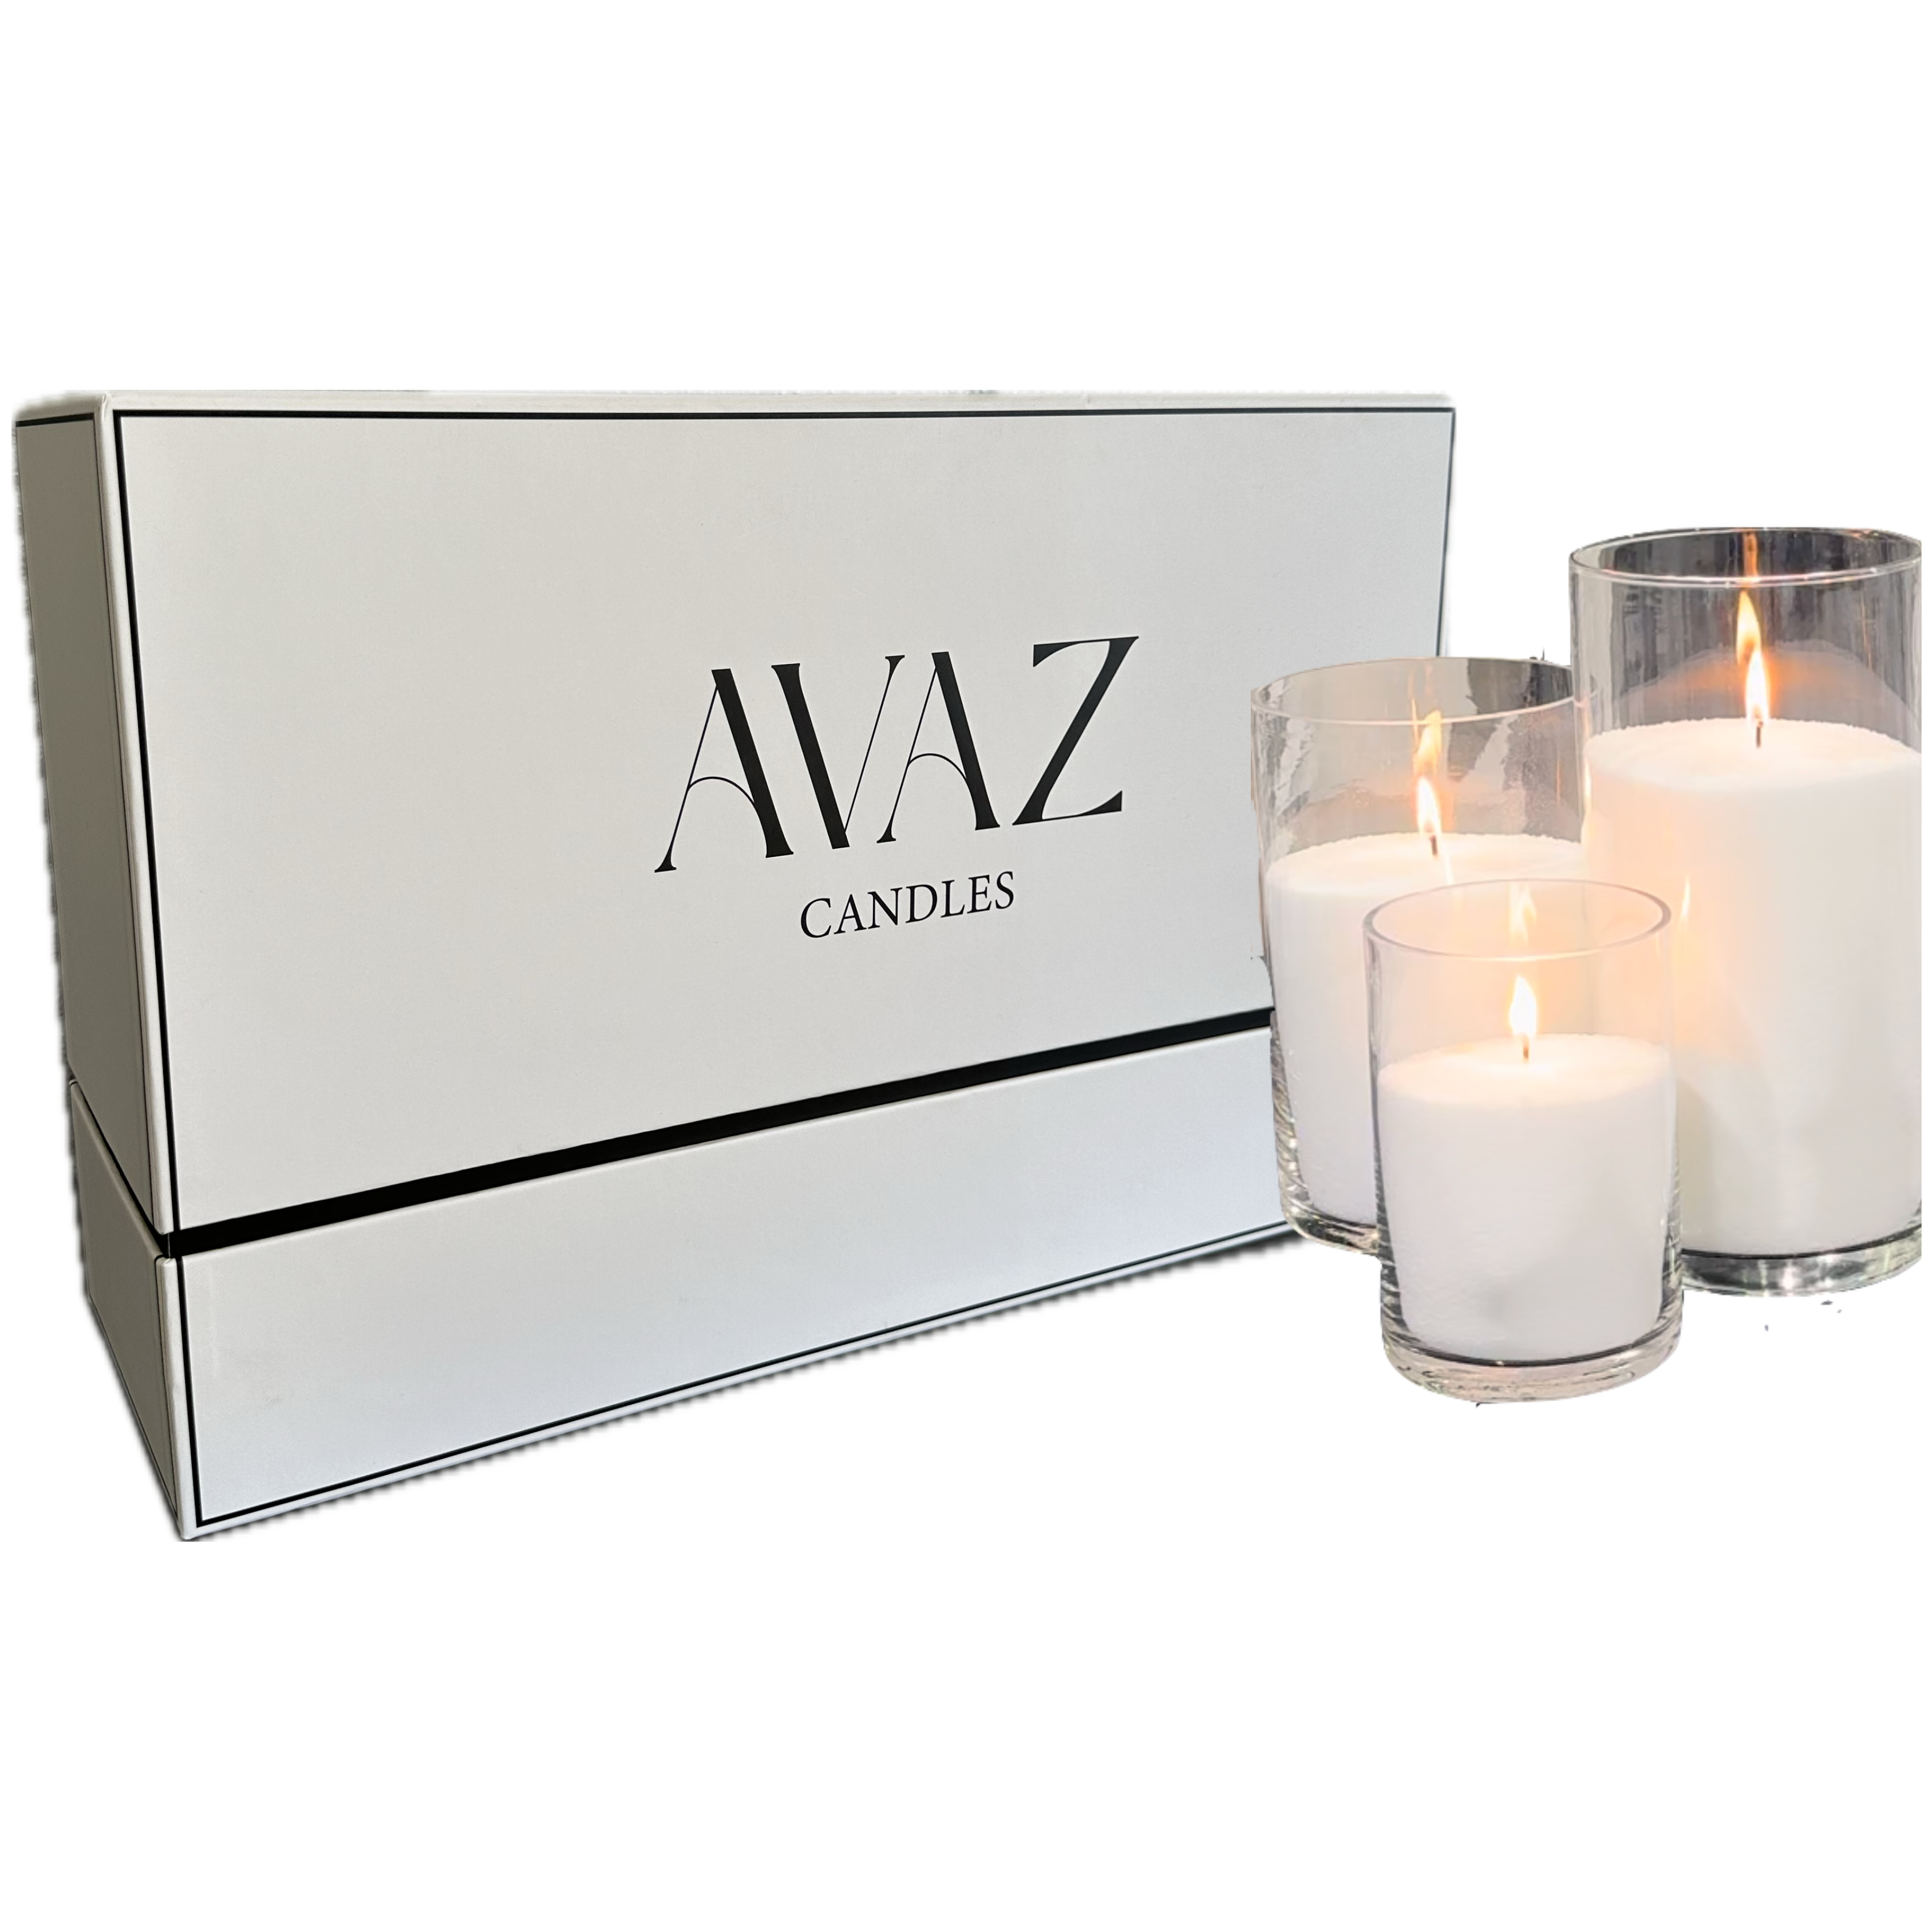 Avaz Candles Gift Set- Trio